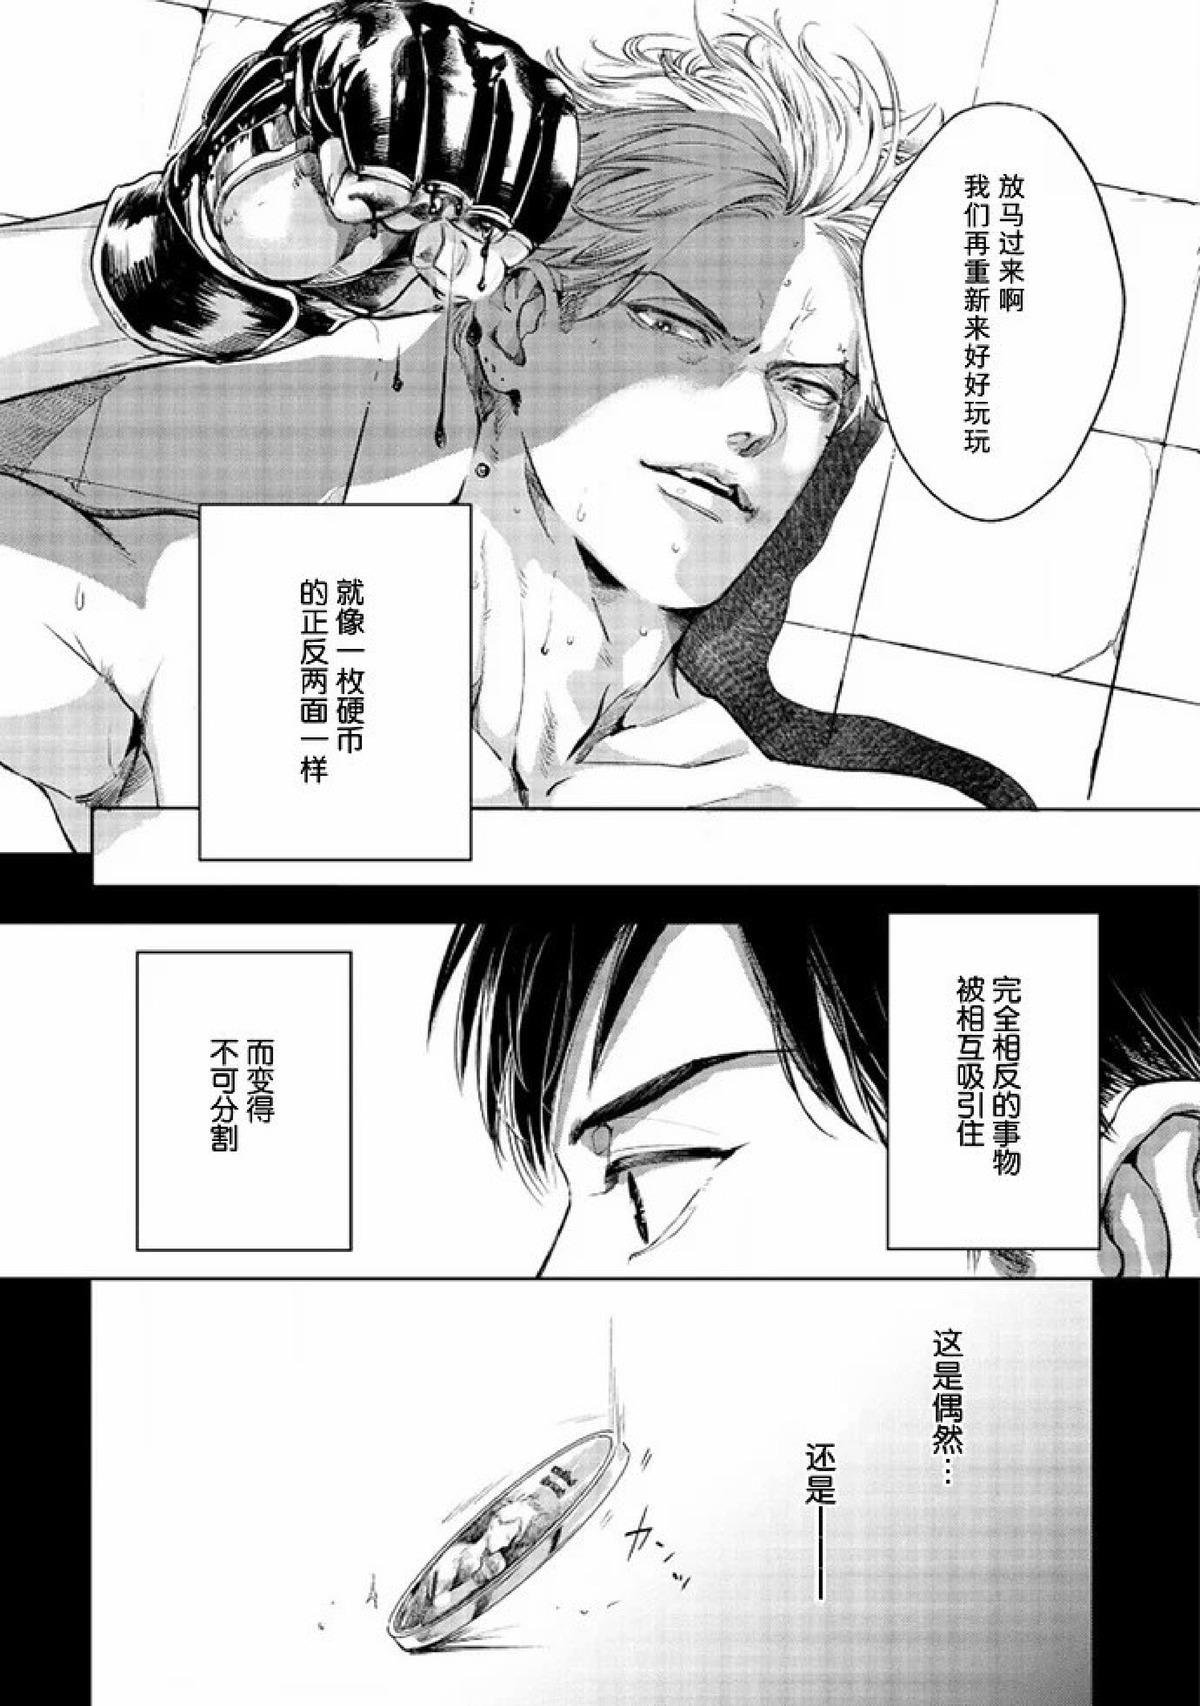 【Two sides of the same coin[腐漫]】漫画-（上卷01-02）章节漫画下拉式图片-11.jpg